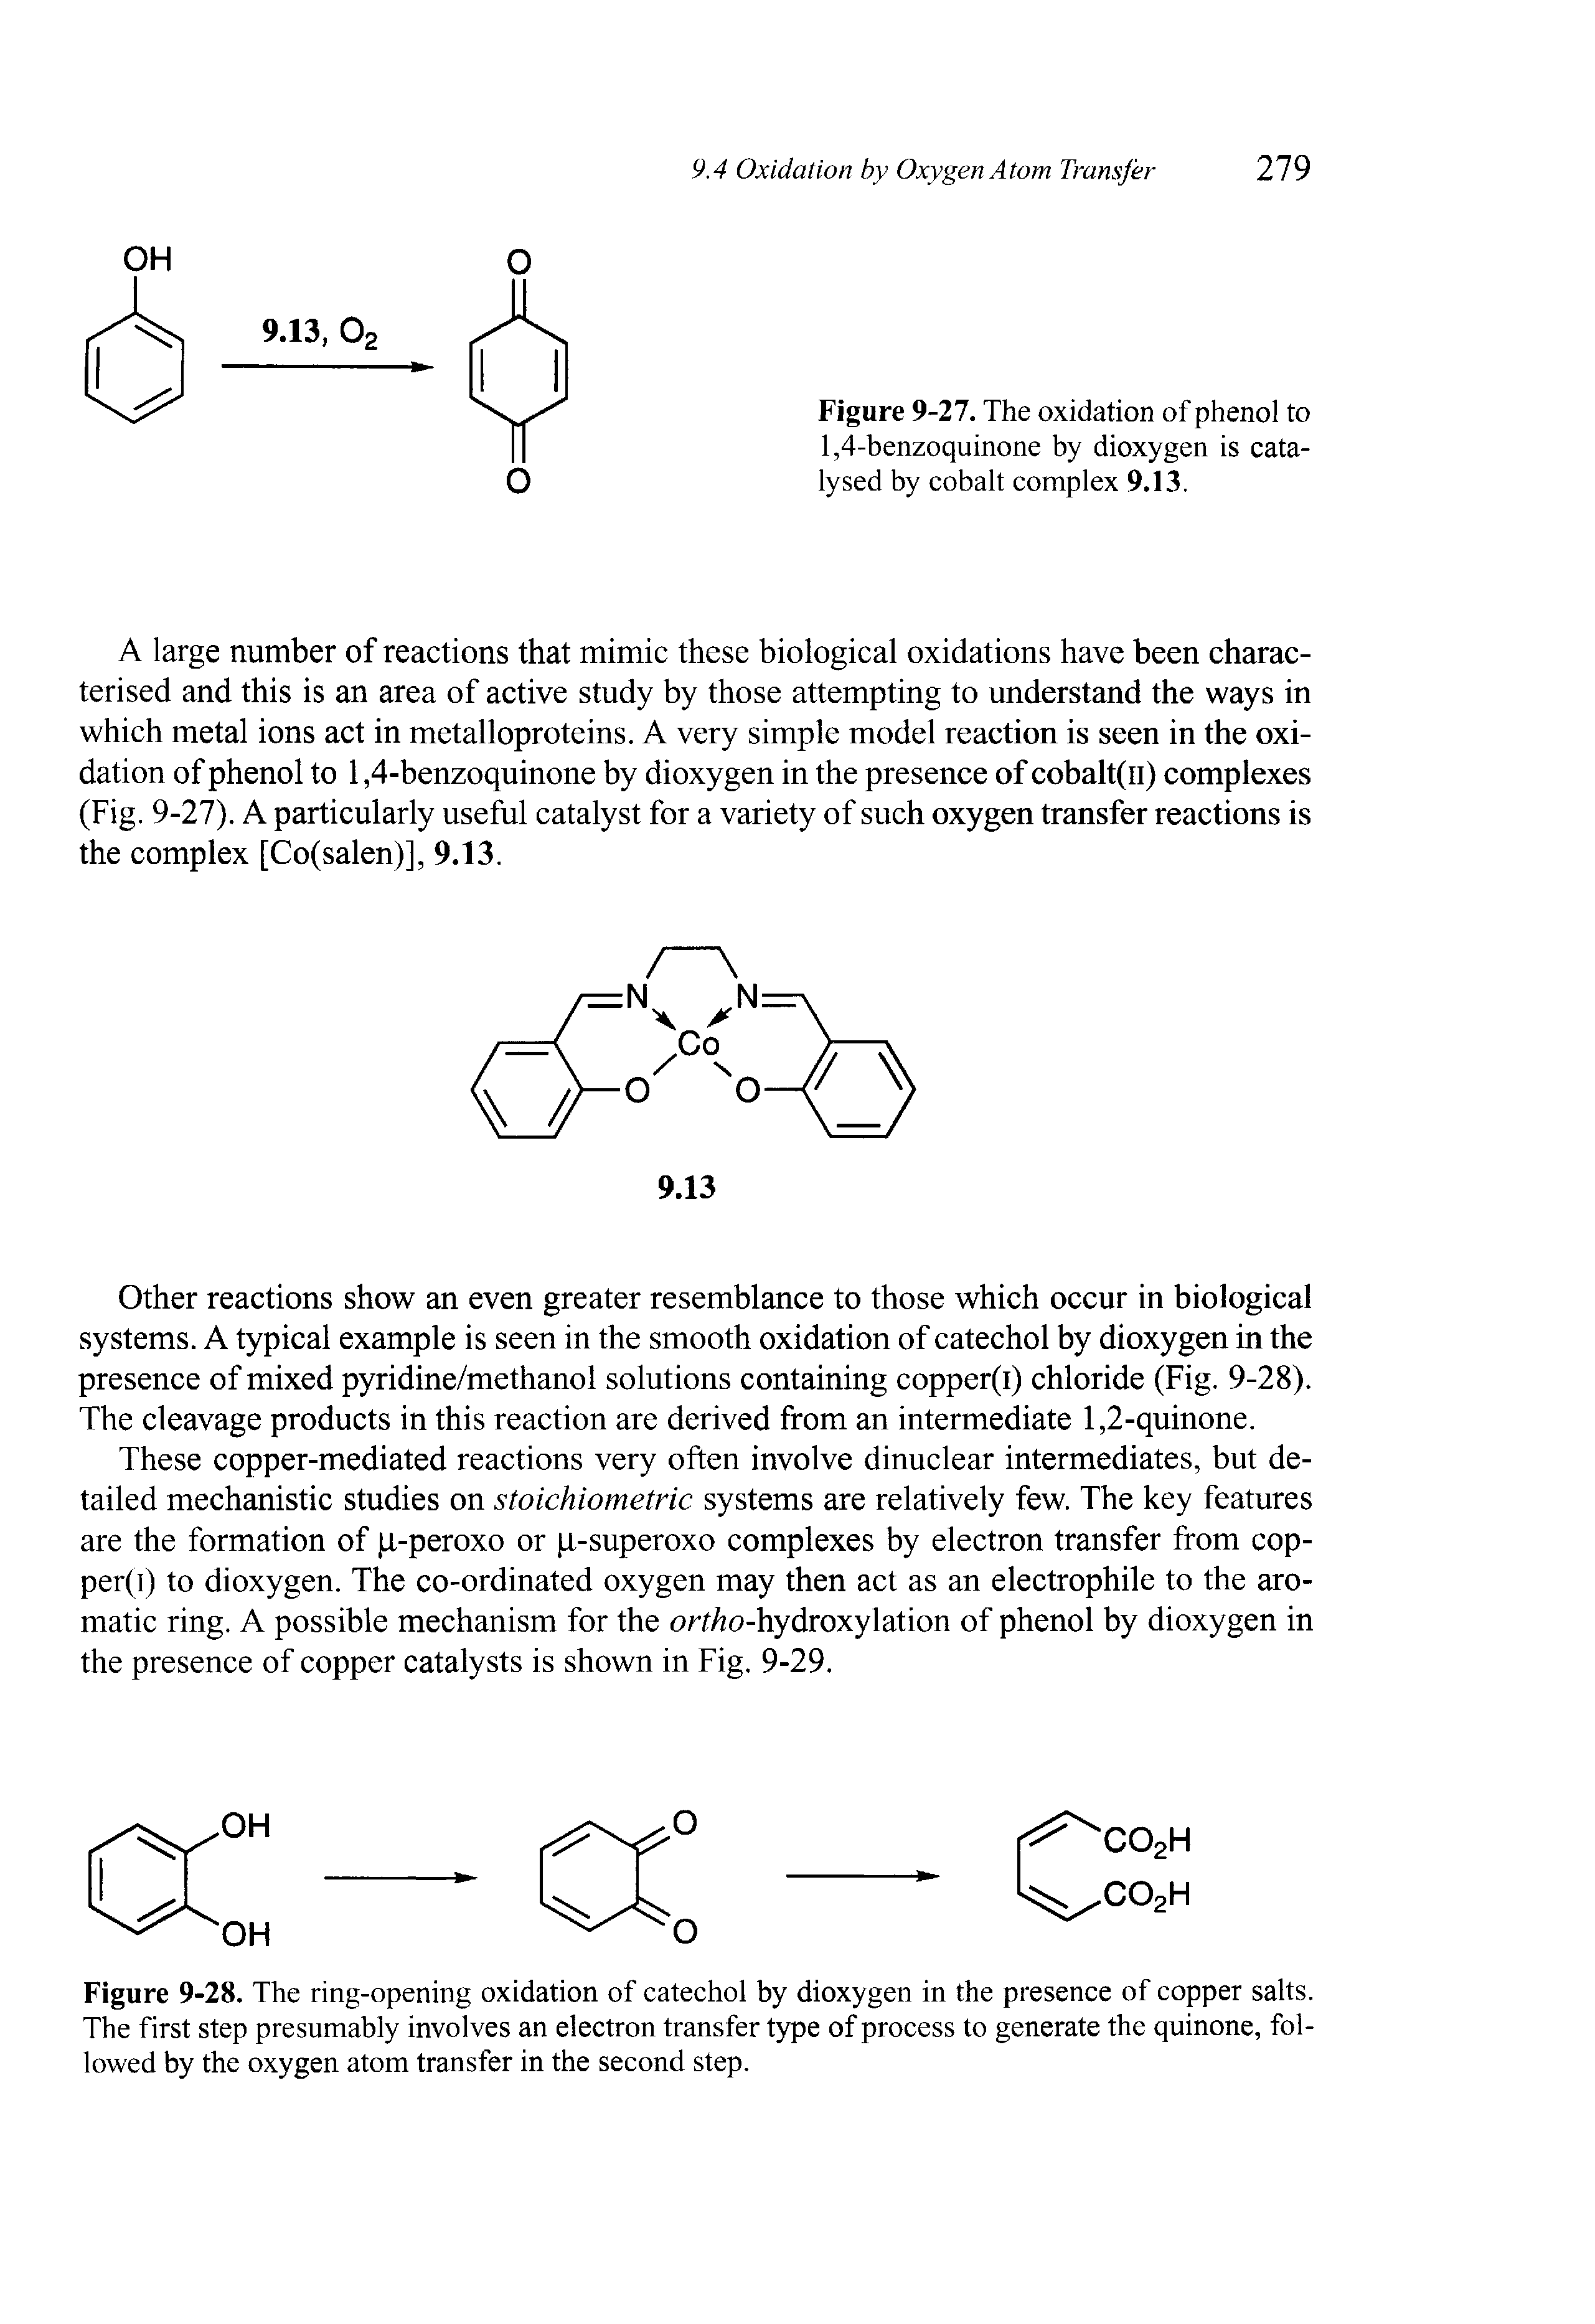 Figure 9-28. The ring-opening oxidation of catechol by dioxygen in the presence of copper salts. The first step presumably involves an electron transfer type of process to generate the quinone, followed by the oxygen atom transfer in the second step.